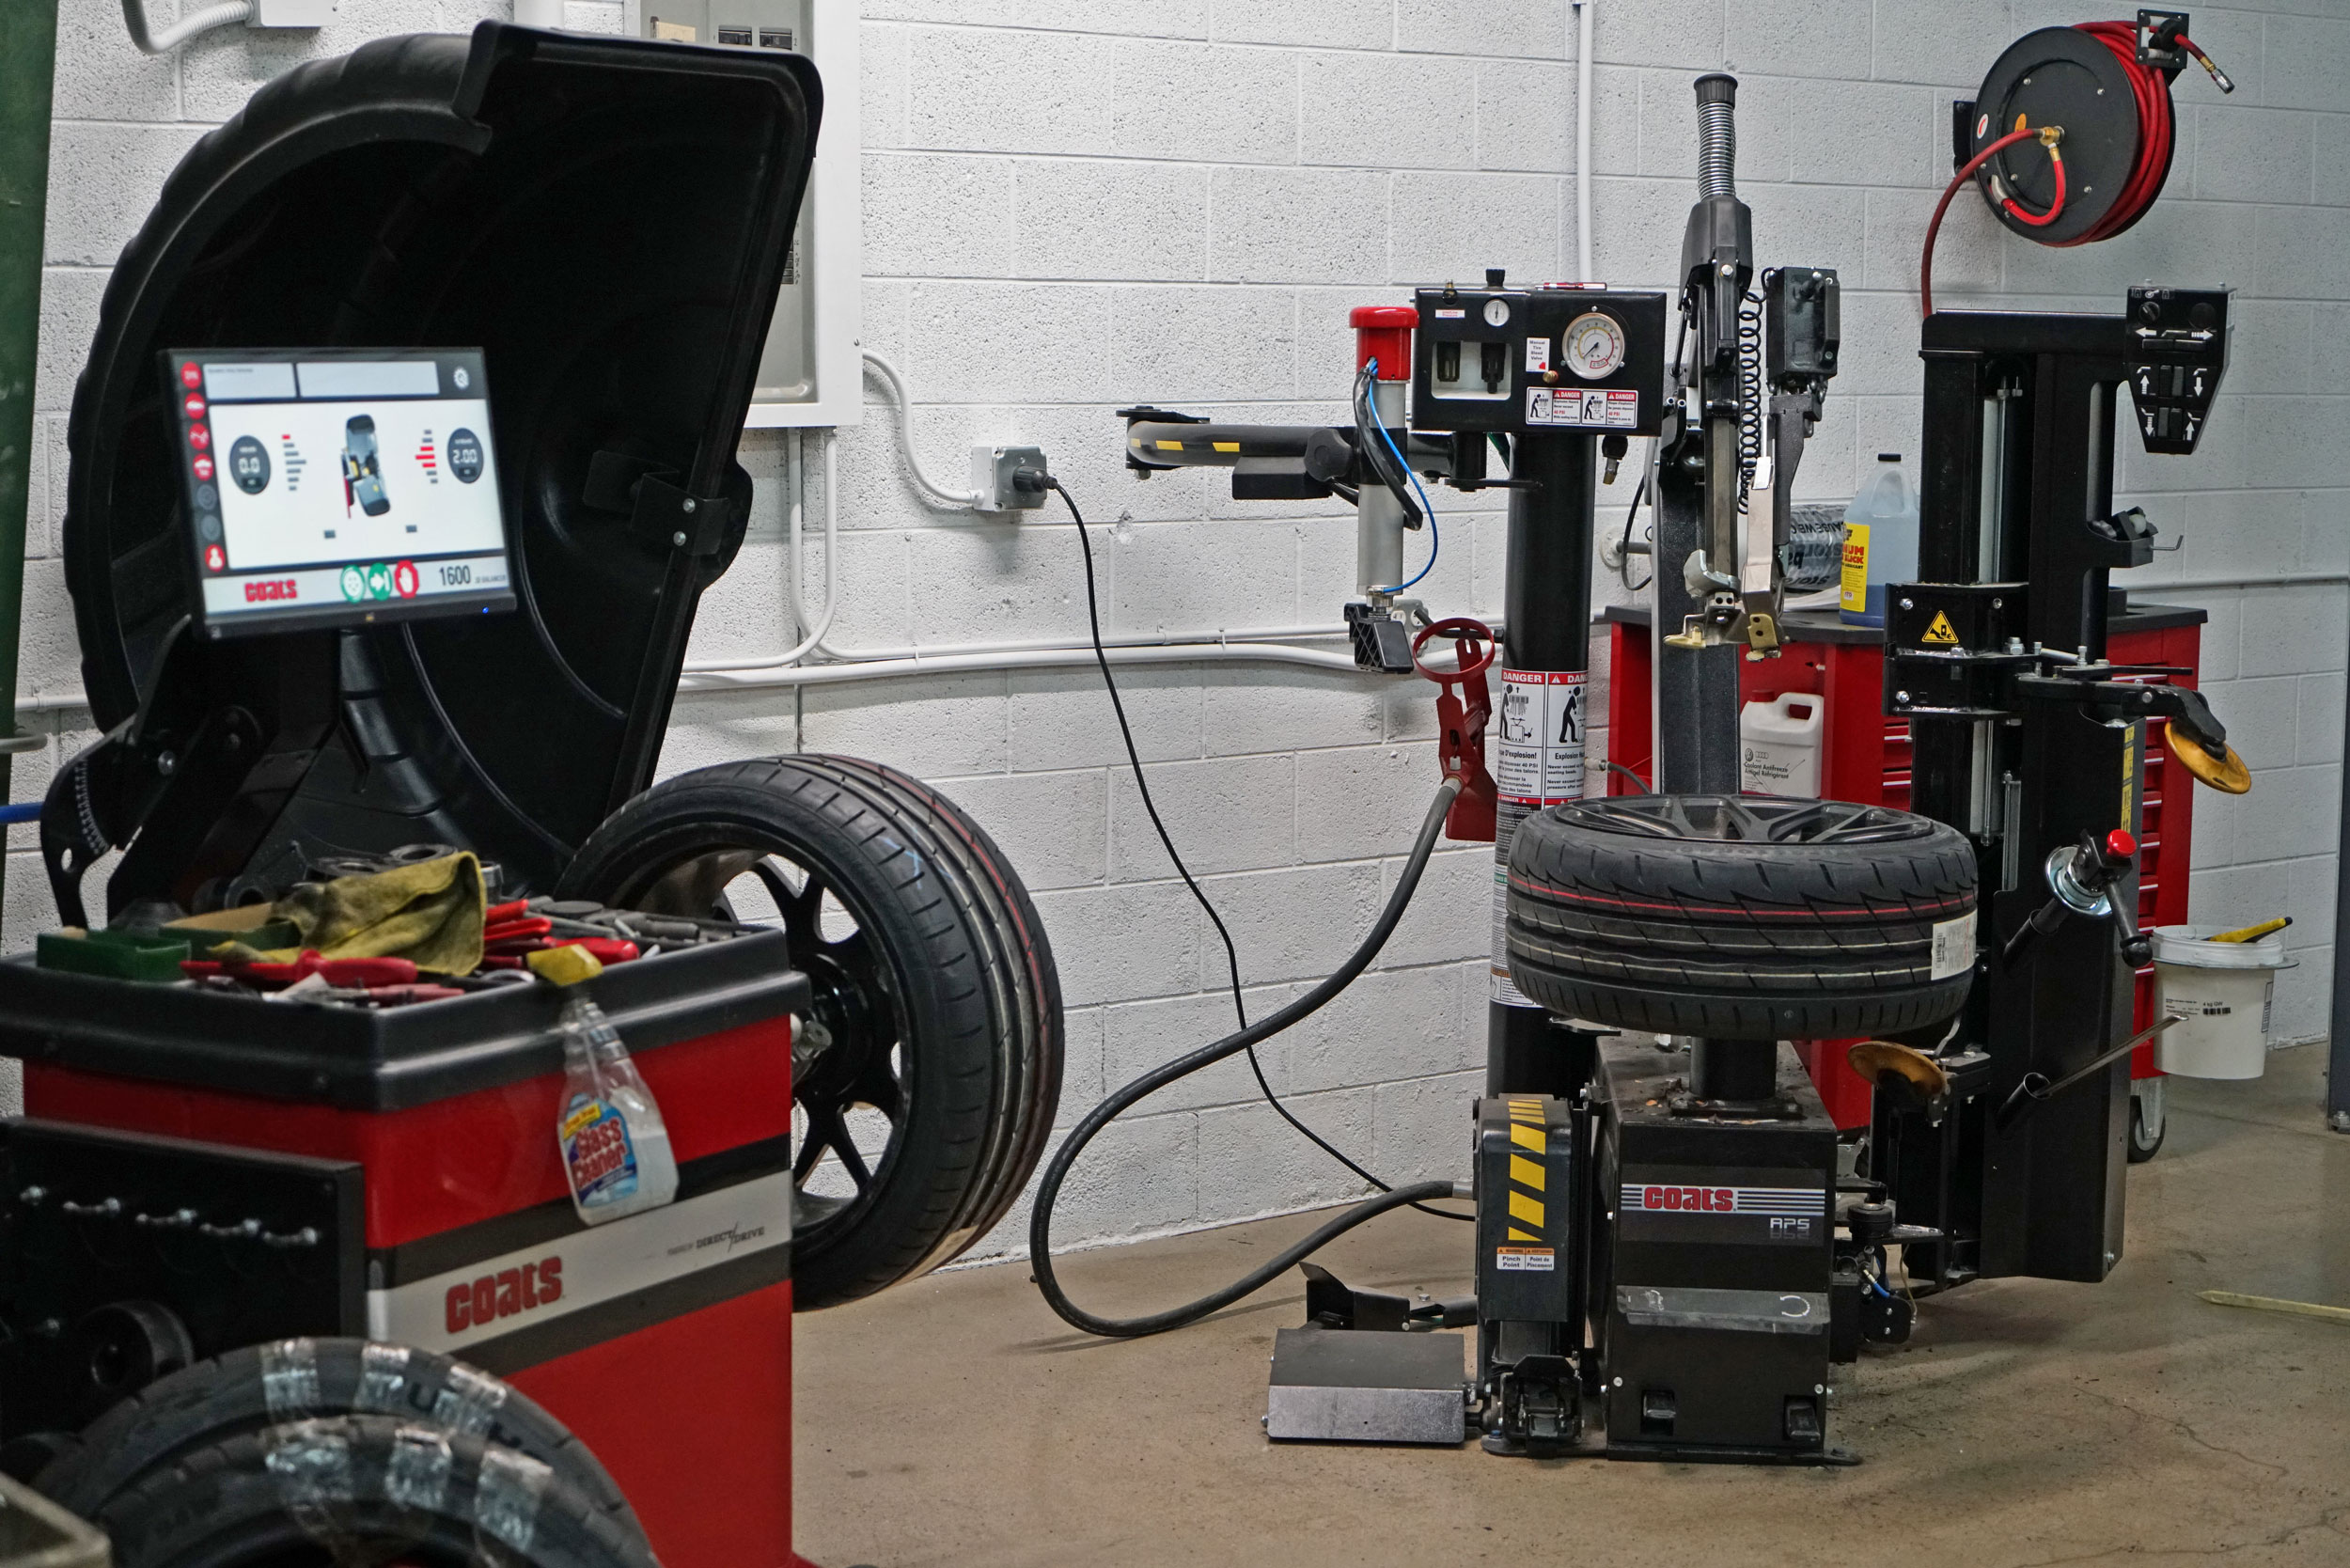 Image of a tire undergoing tire alignment in the machine.